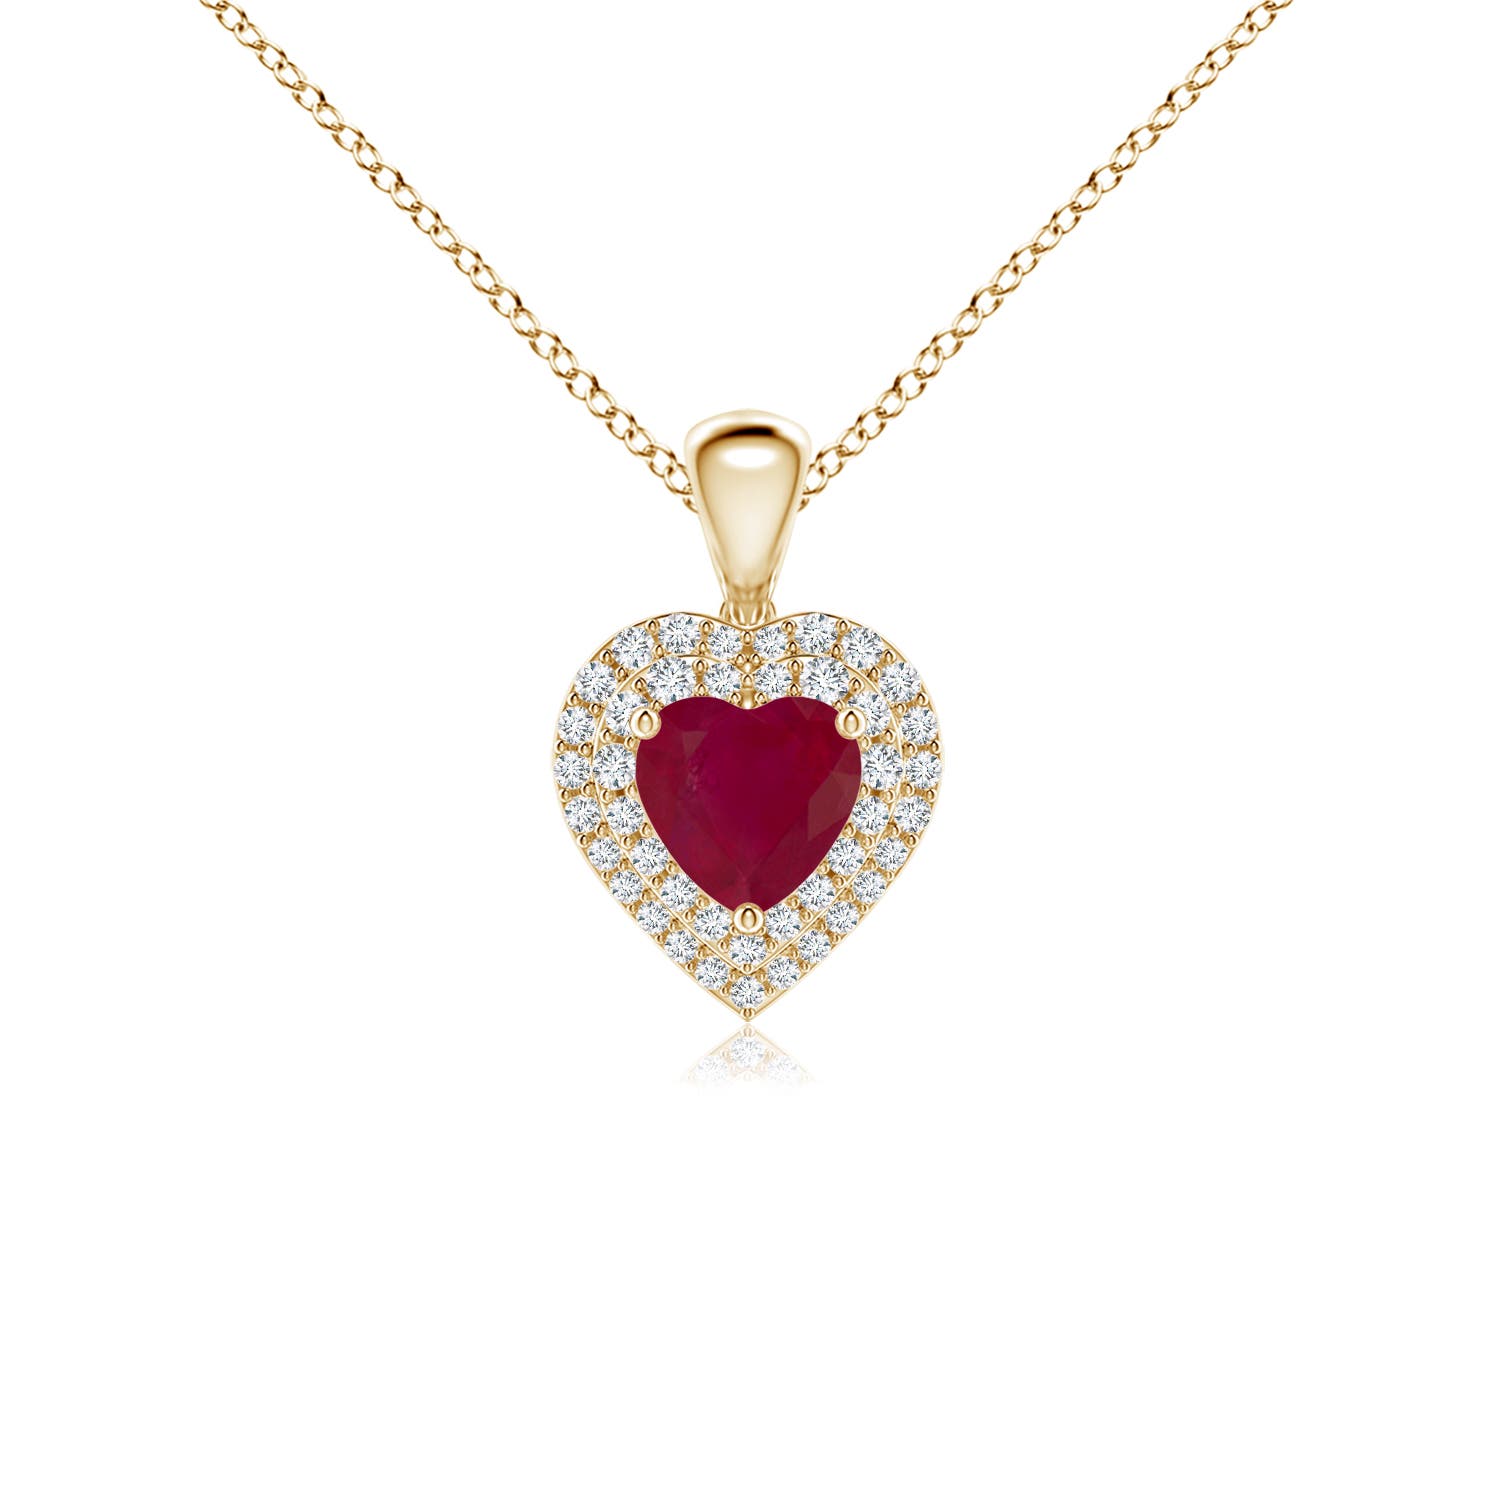 A - Ruby / 0.94 CT / 14 KT Yellow Gold